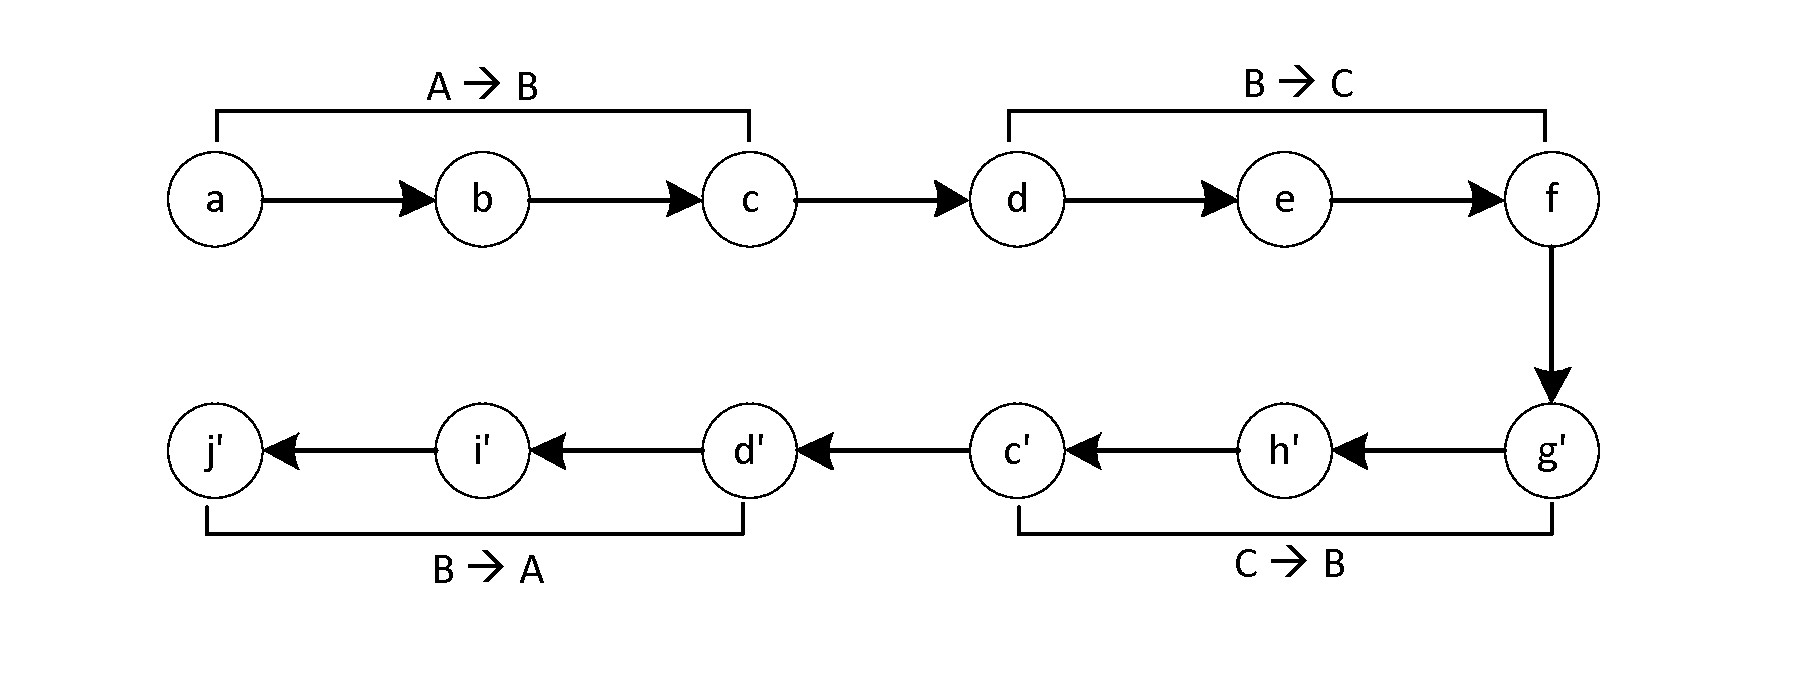 Automatic construction of deadlock free interconnects